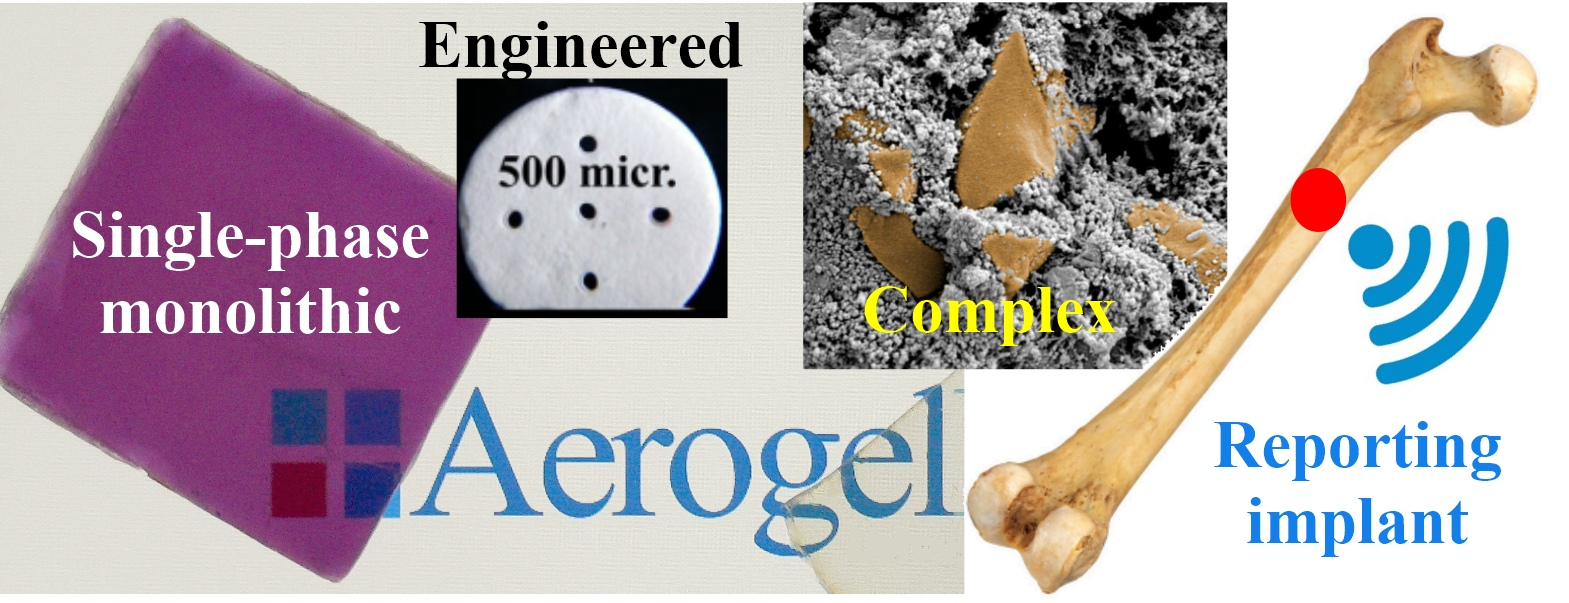 Aerogel: The Futuristic Material Hindered by Real World Limitations